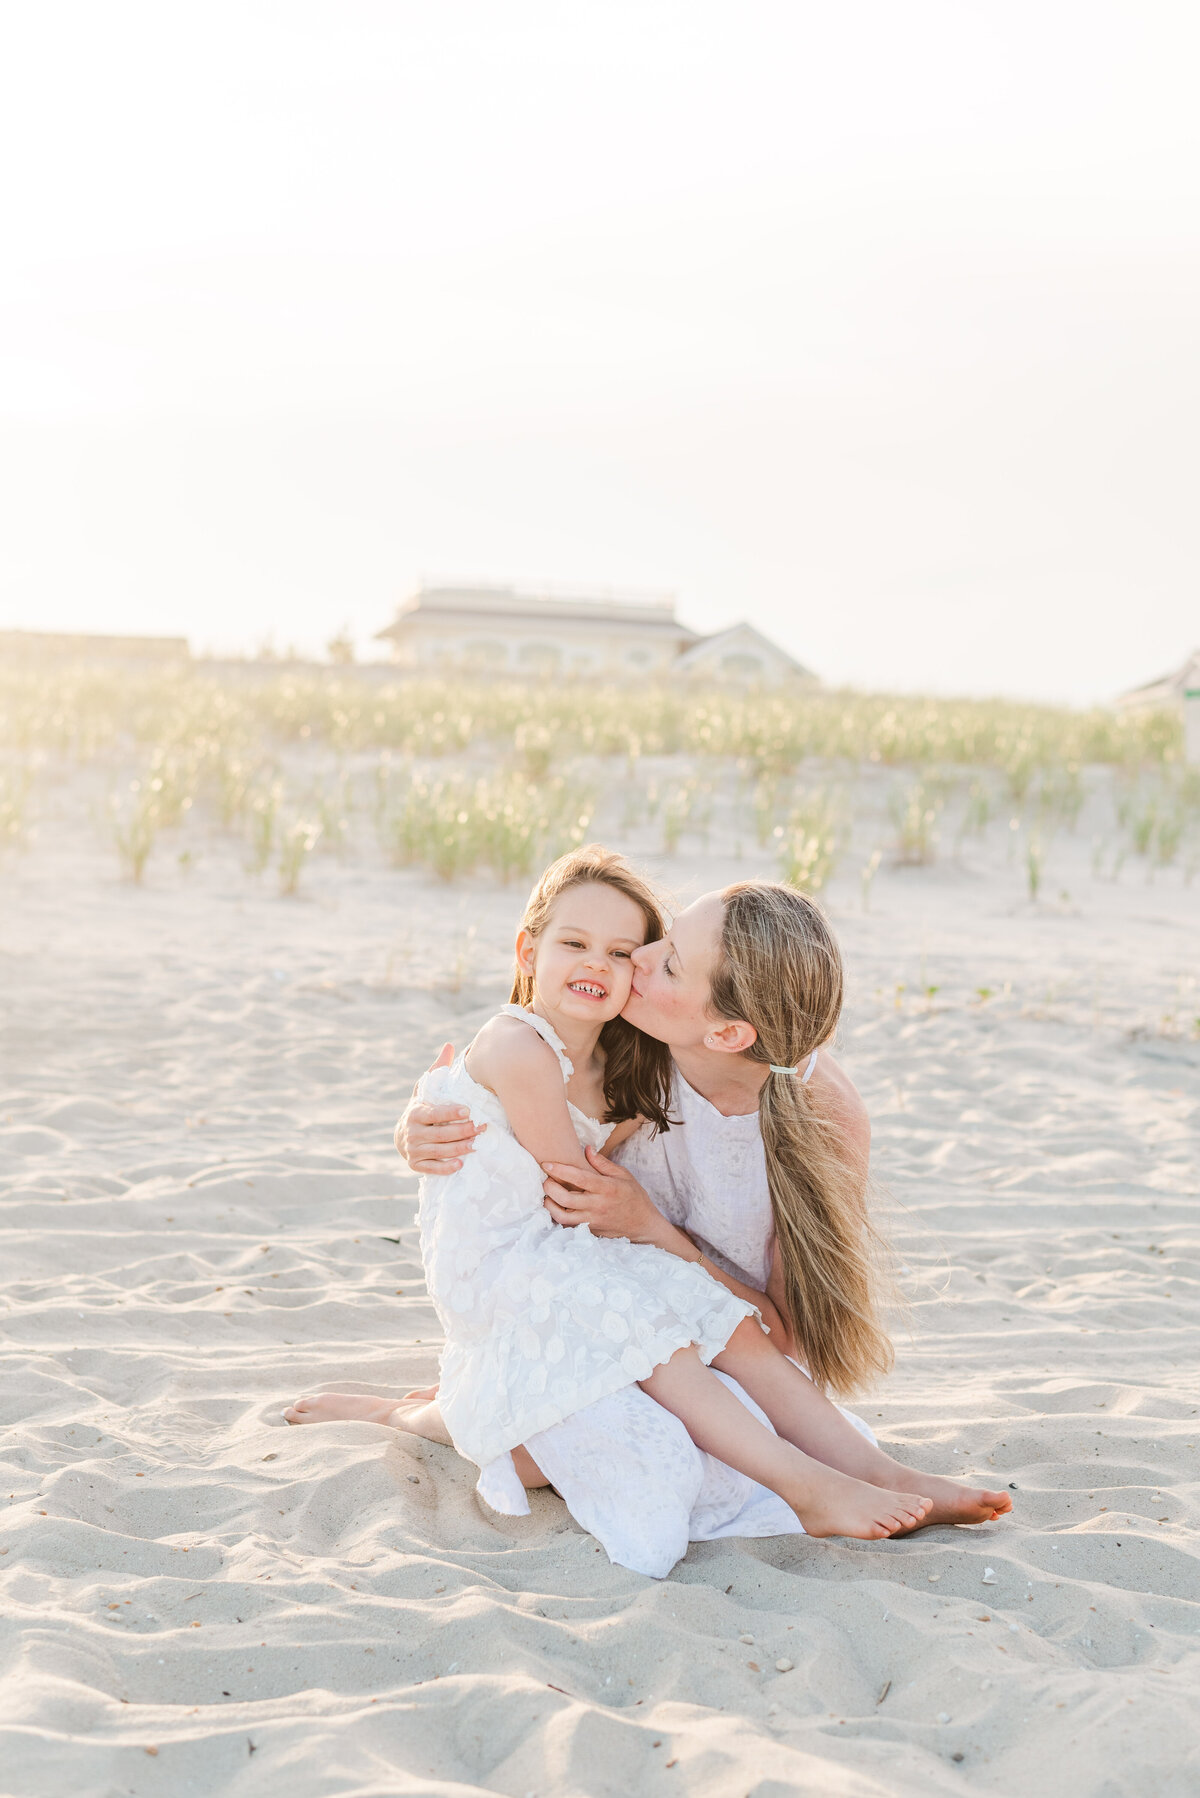 Mom and daughter on beach